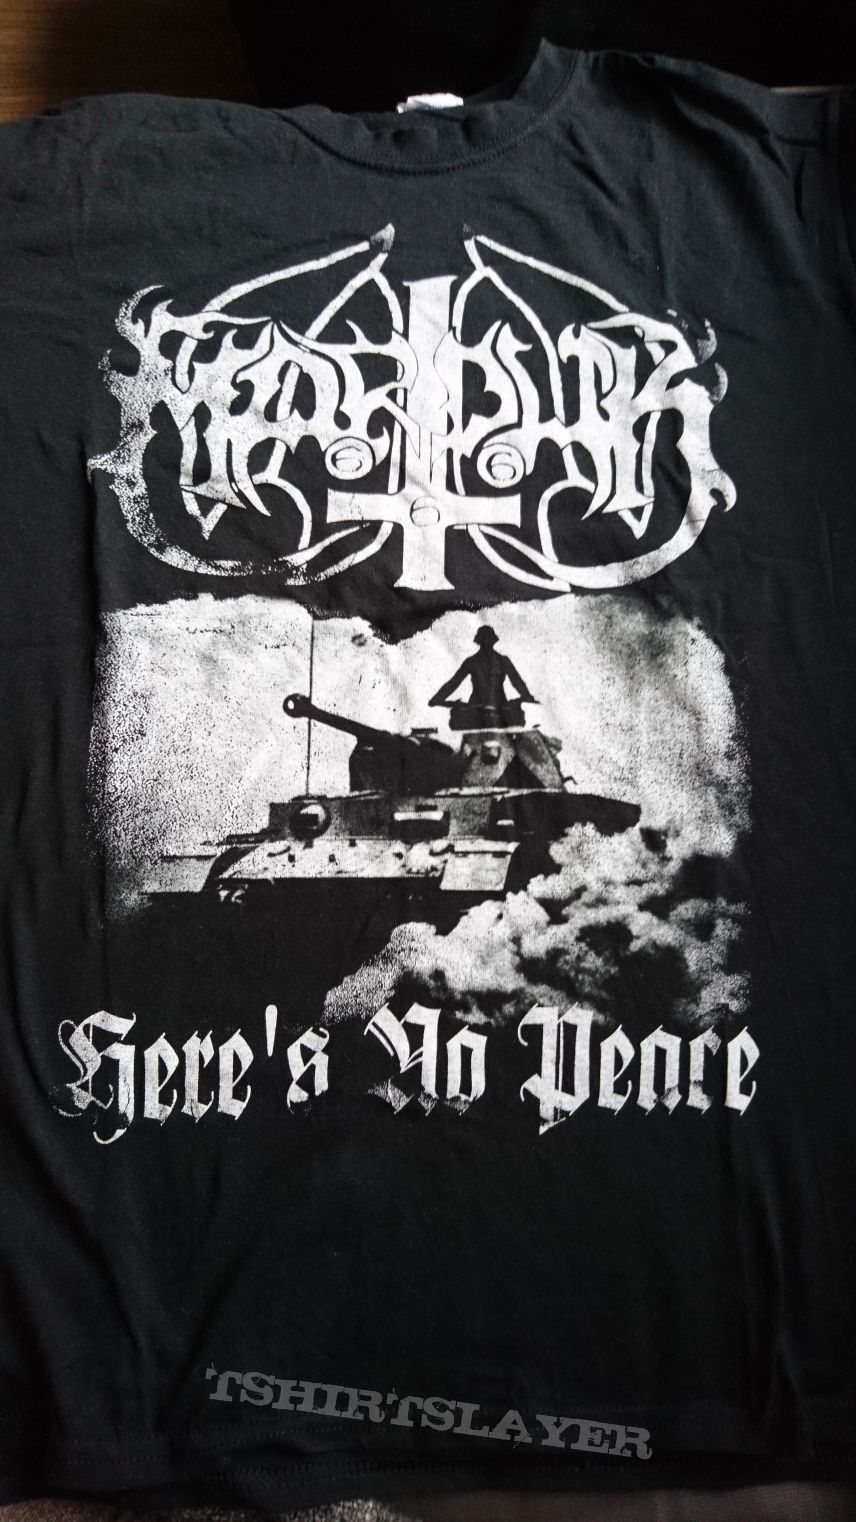 Marduk - There is no Peace 